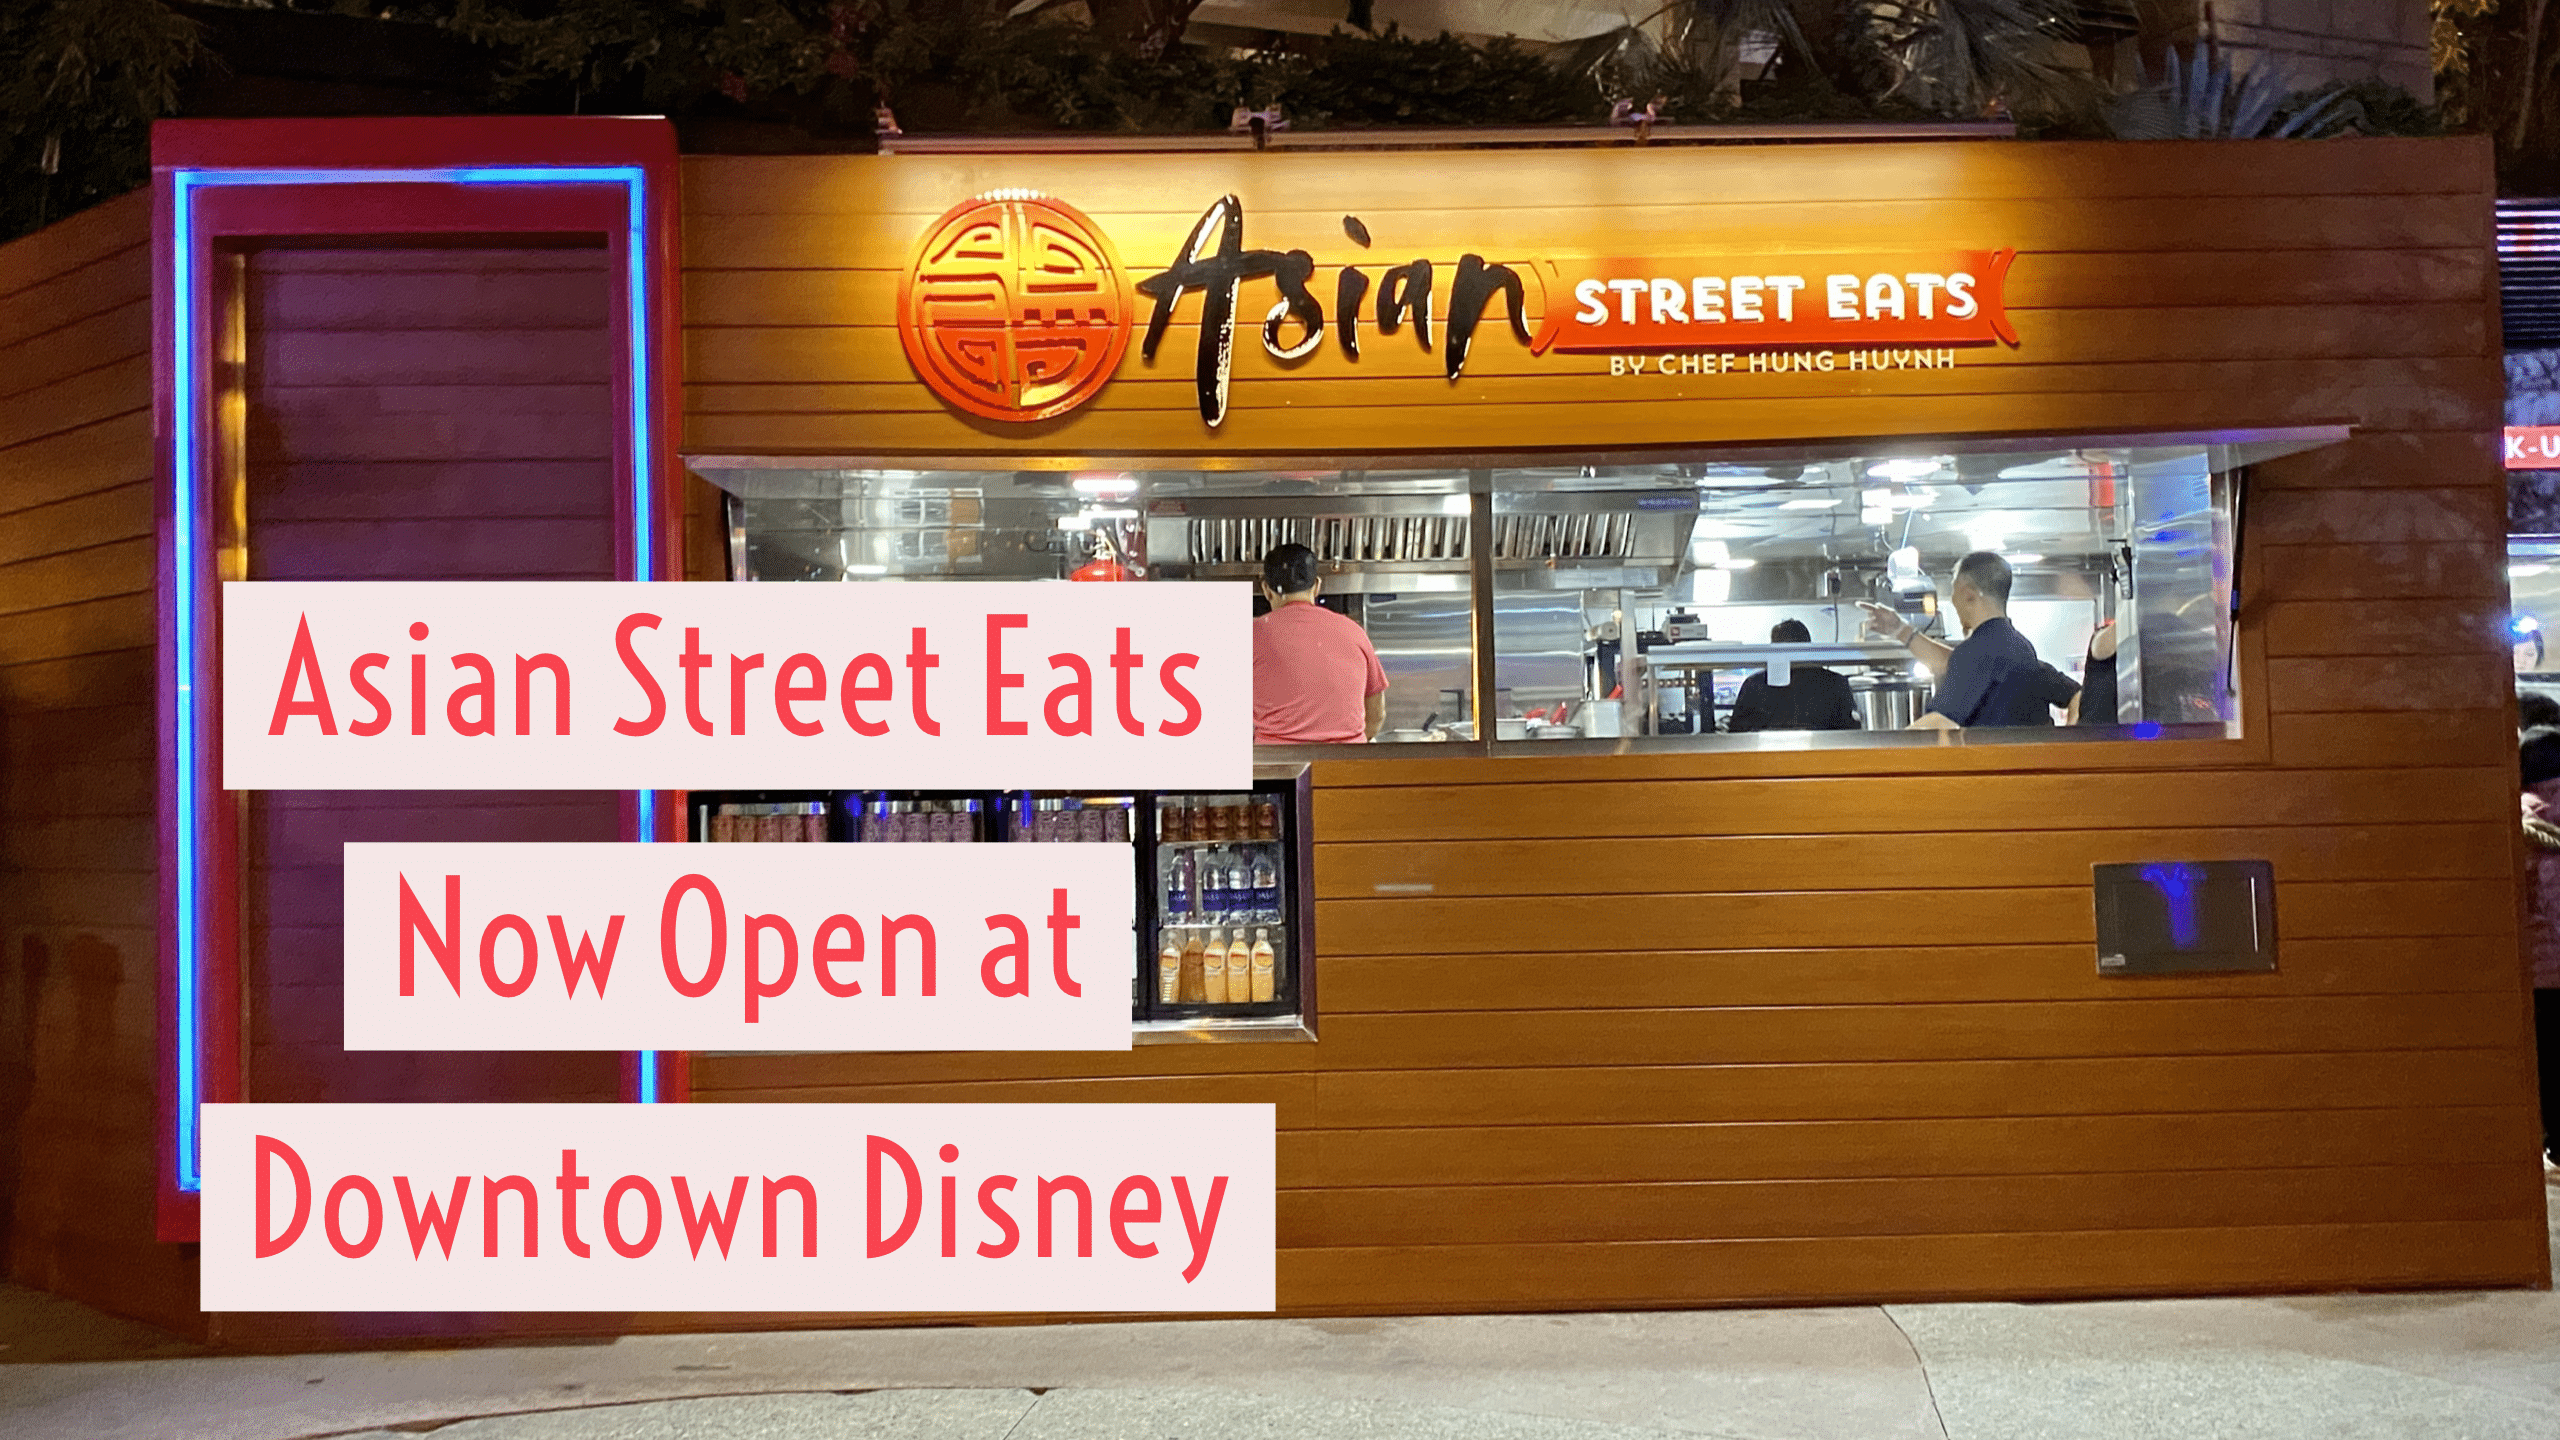 Asian Street Eats Has Surprise Opening at Downtown Disney on New Year’s Eve